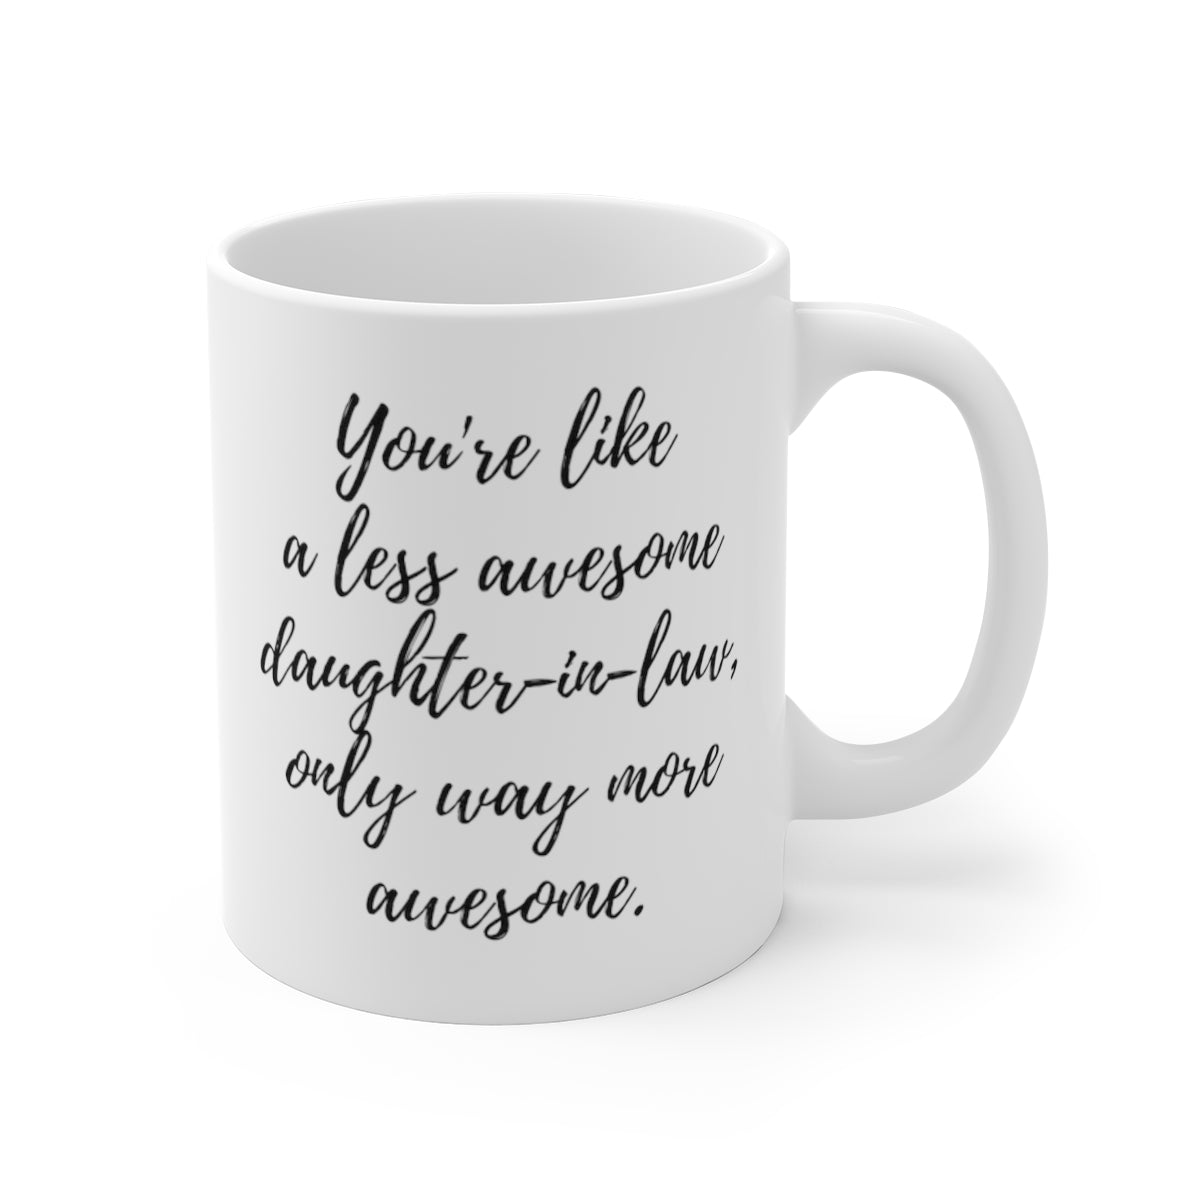 You're Like A Less Awesome Daughter-In-Law, Only Way More Awesome | Funny, Snarky Gift | White Ceramic Mug, Script Font